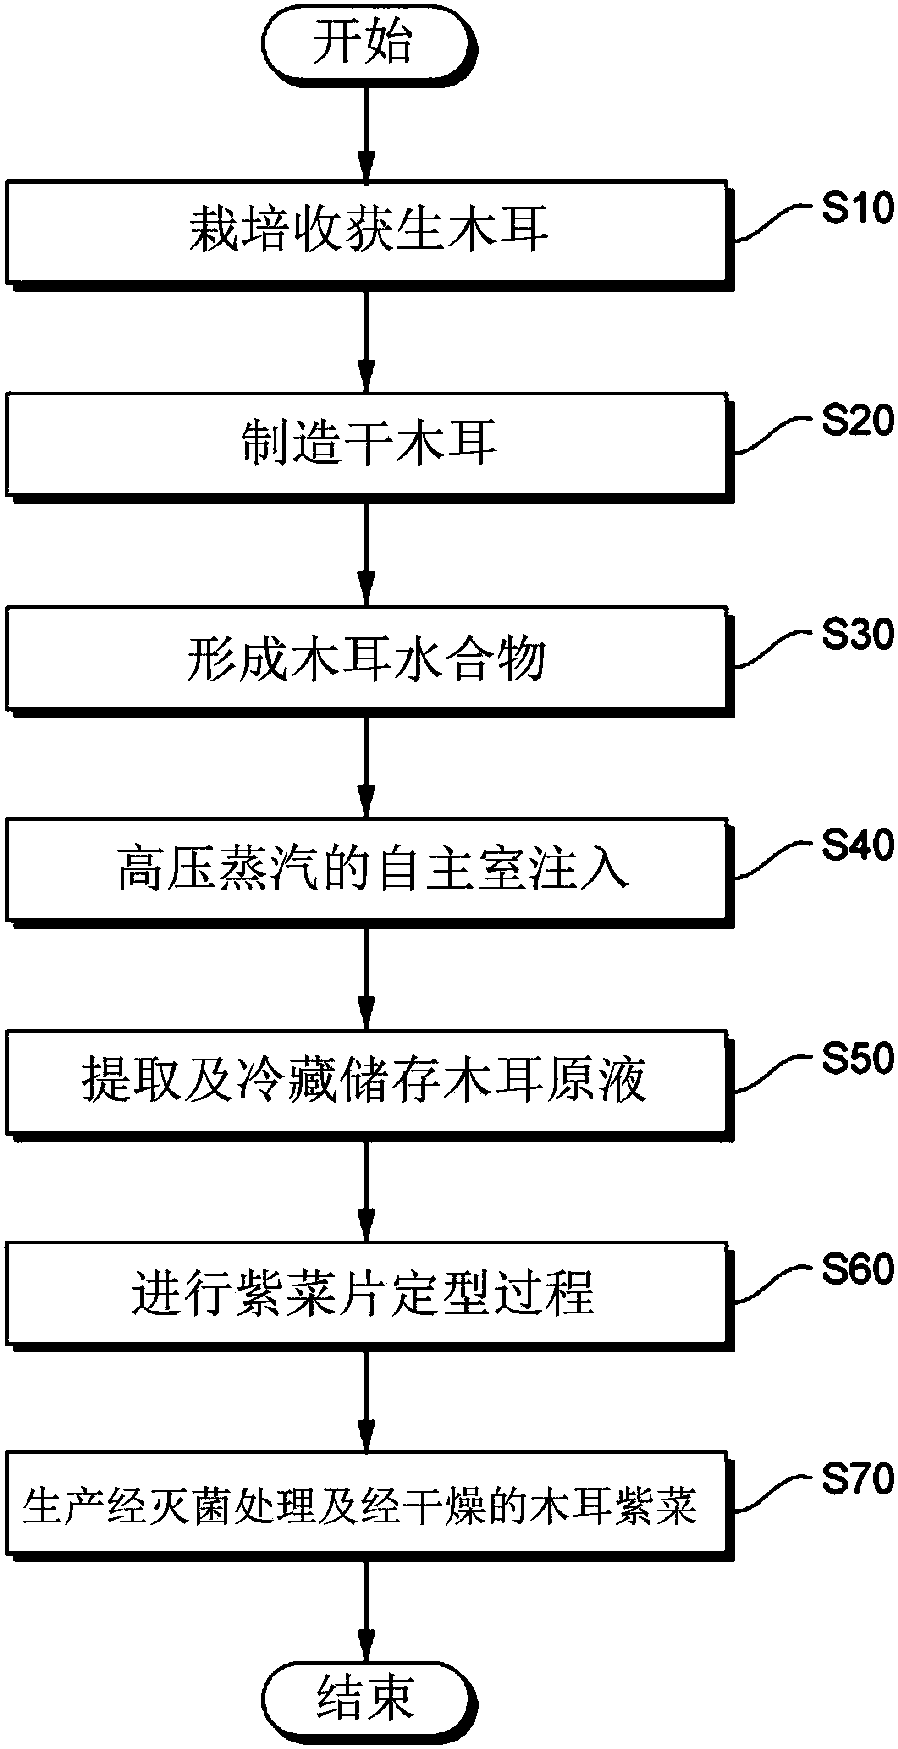 A method for manufacturing tree ear mushroom lavor improved healthy functionality and expiration date